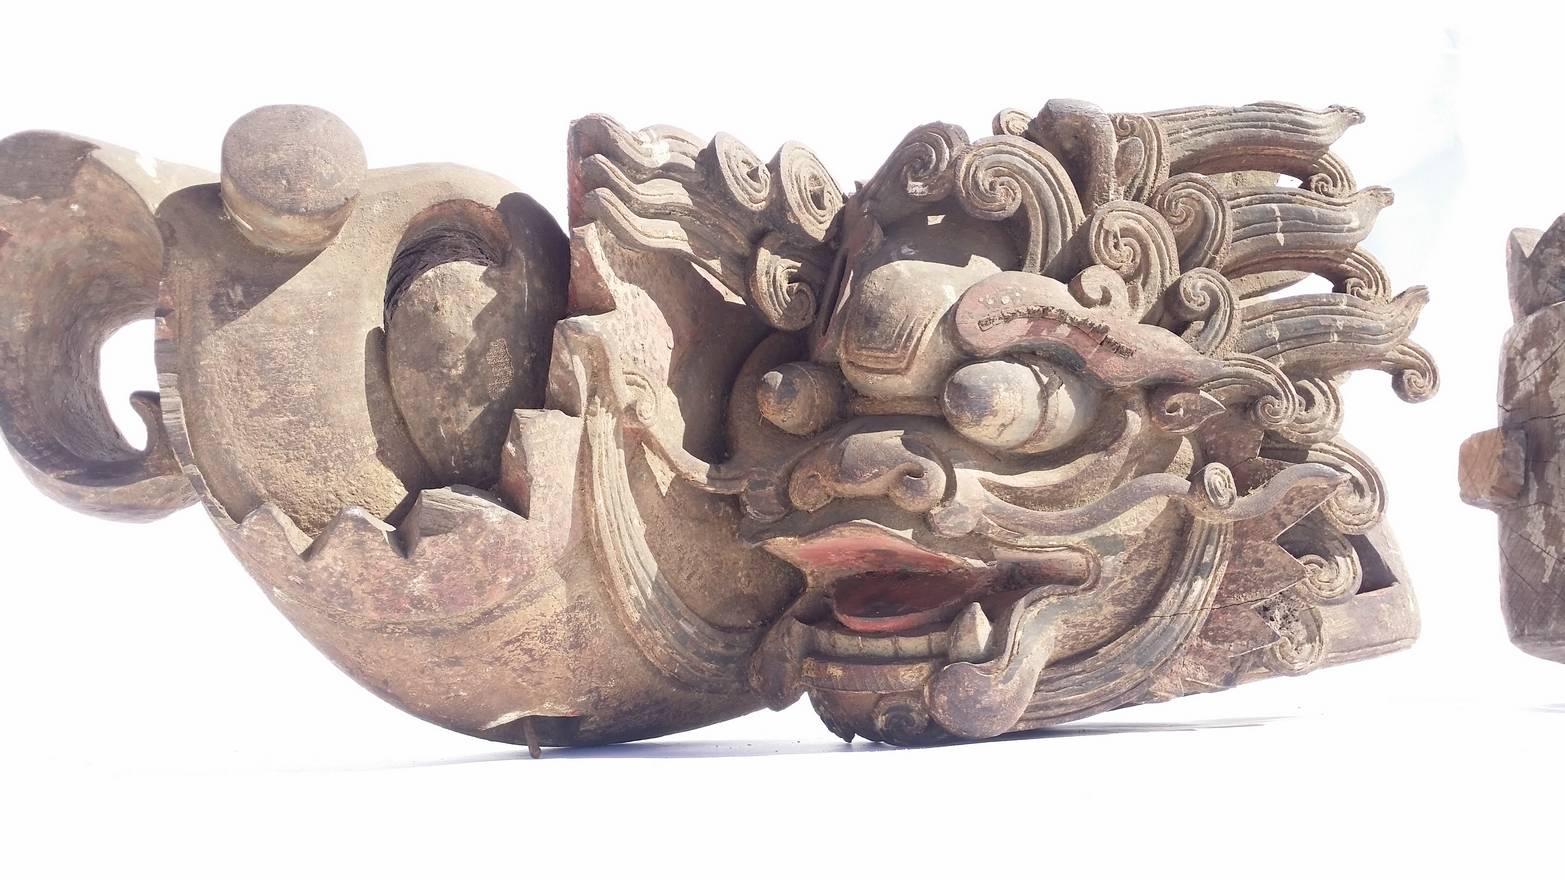 Pair of carved wood Balinese architectural elements. Likely late 18th, early 19th century. Exquisitely carved, depicting 